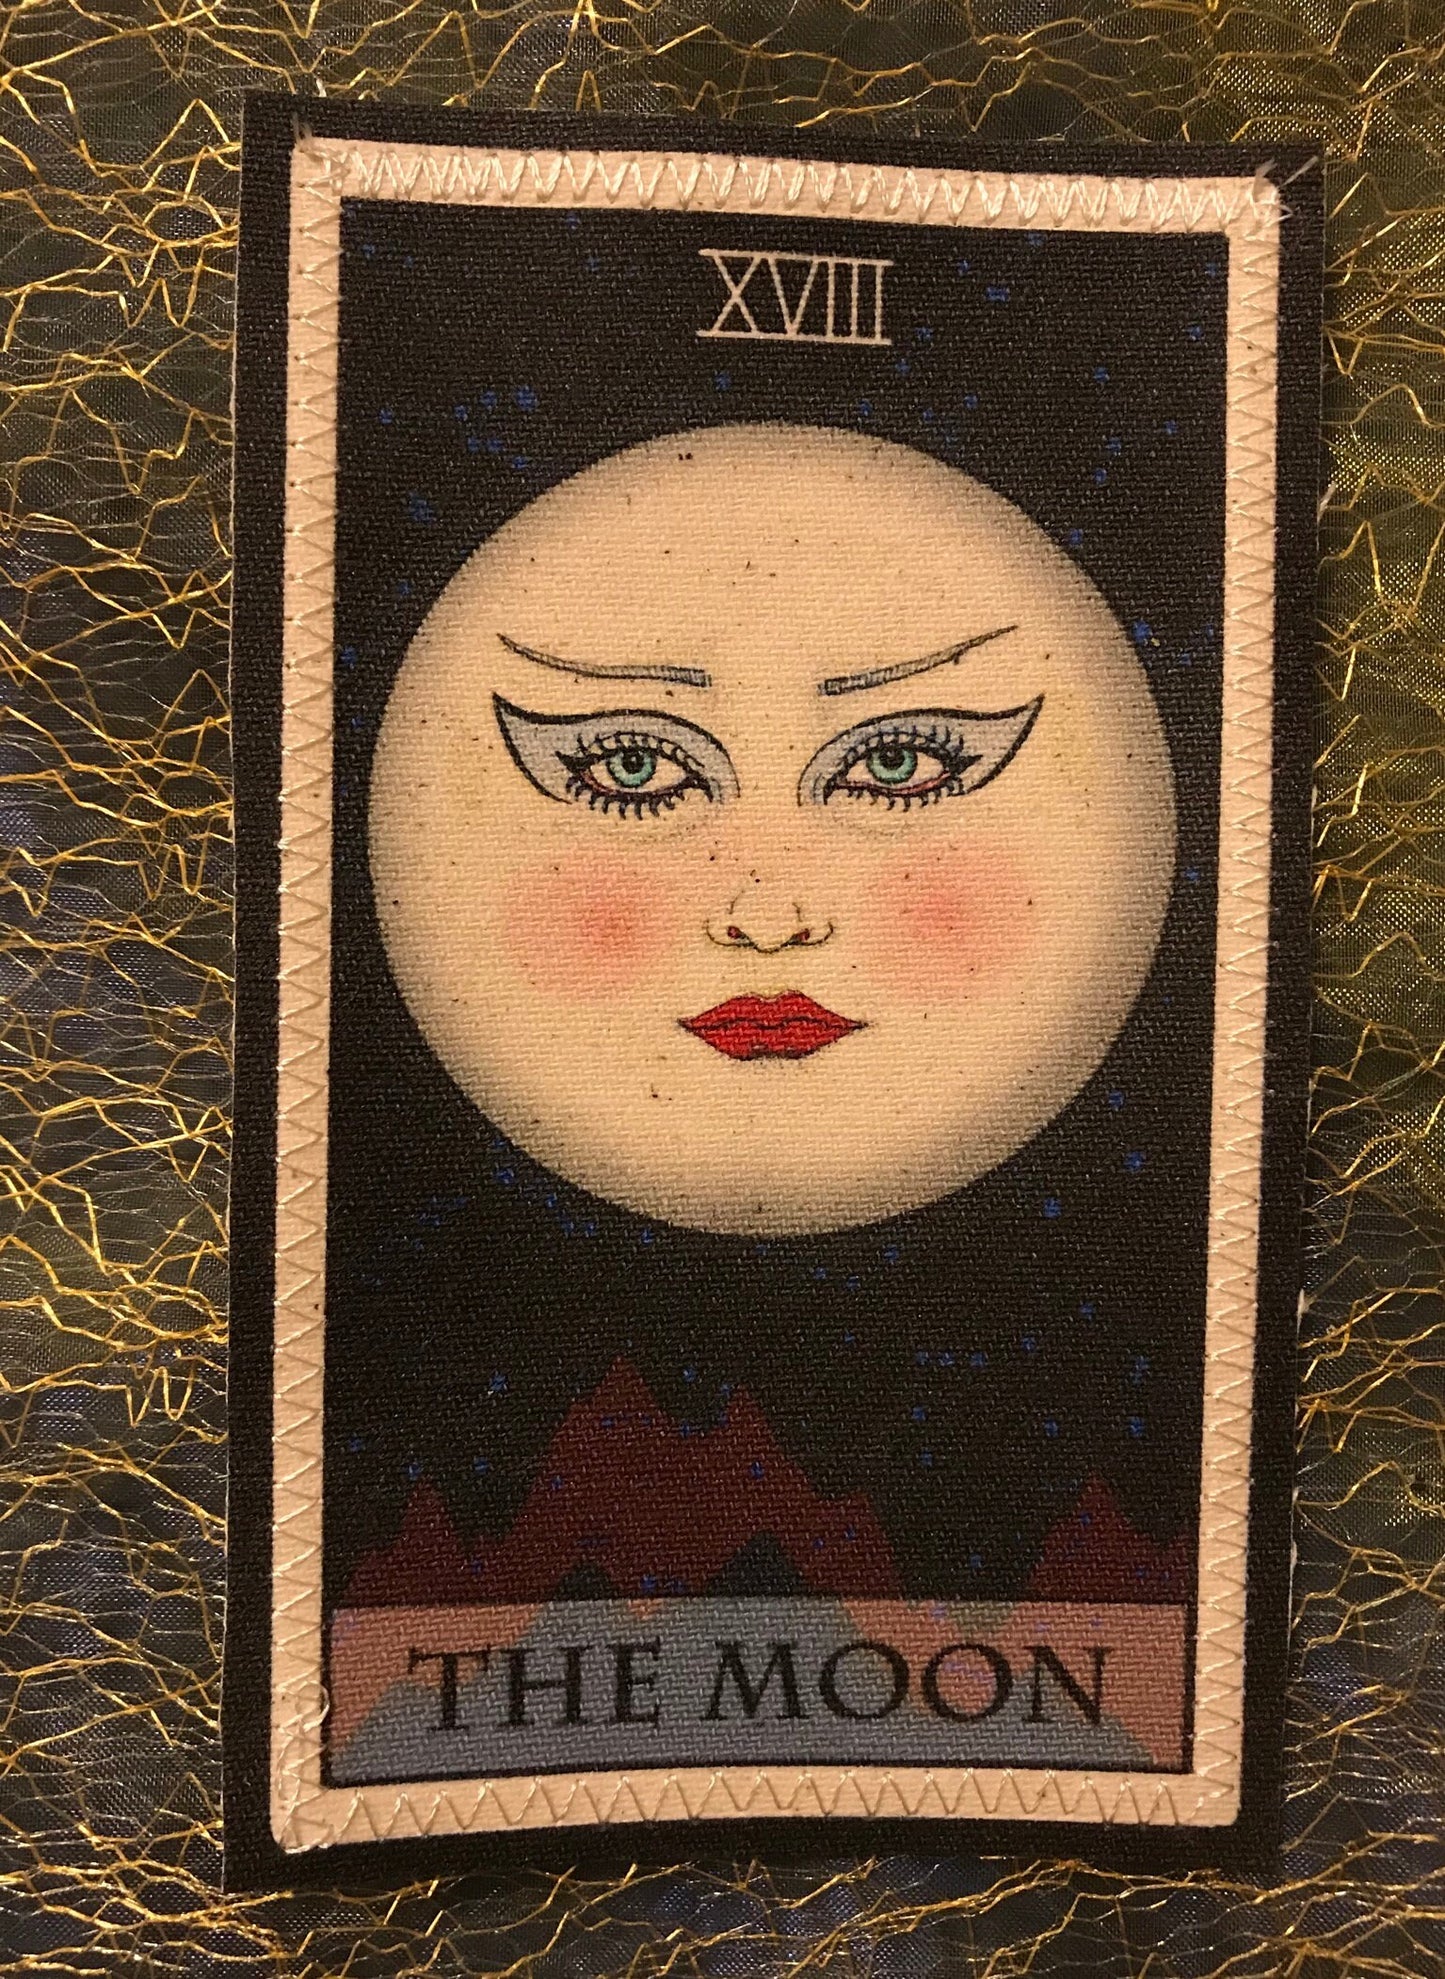 The Moon Canvas Patch